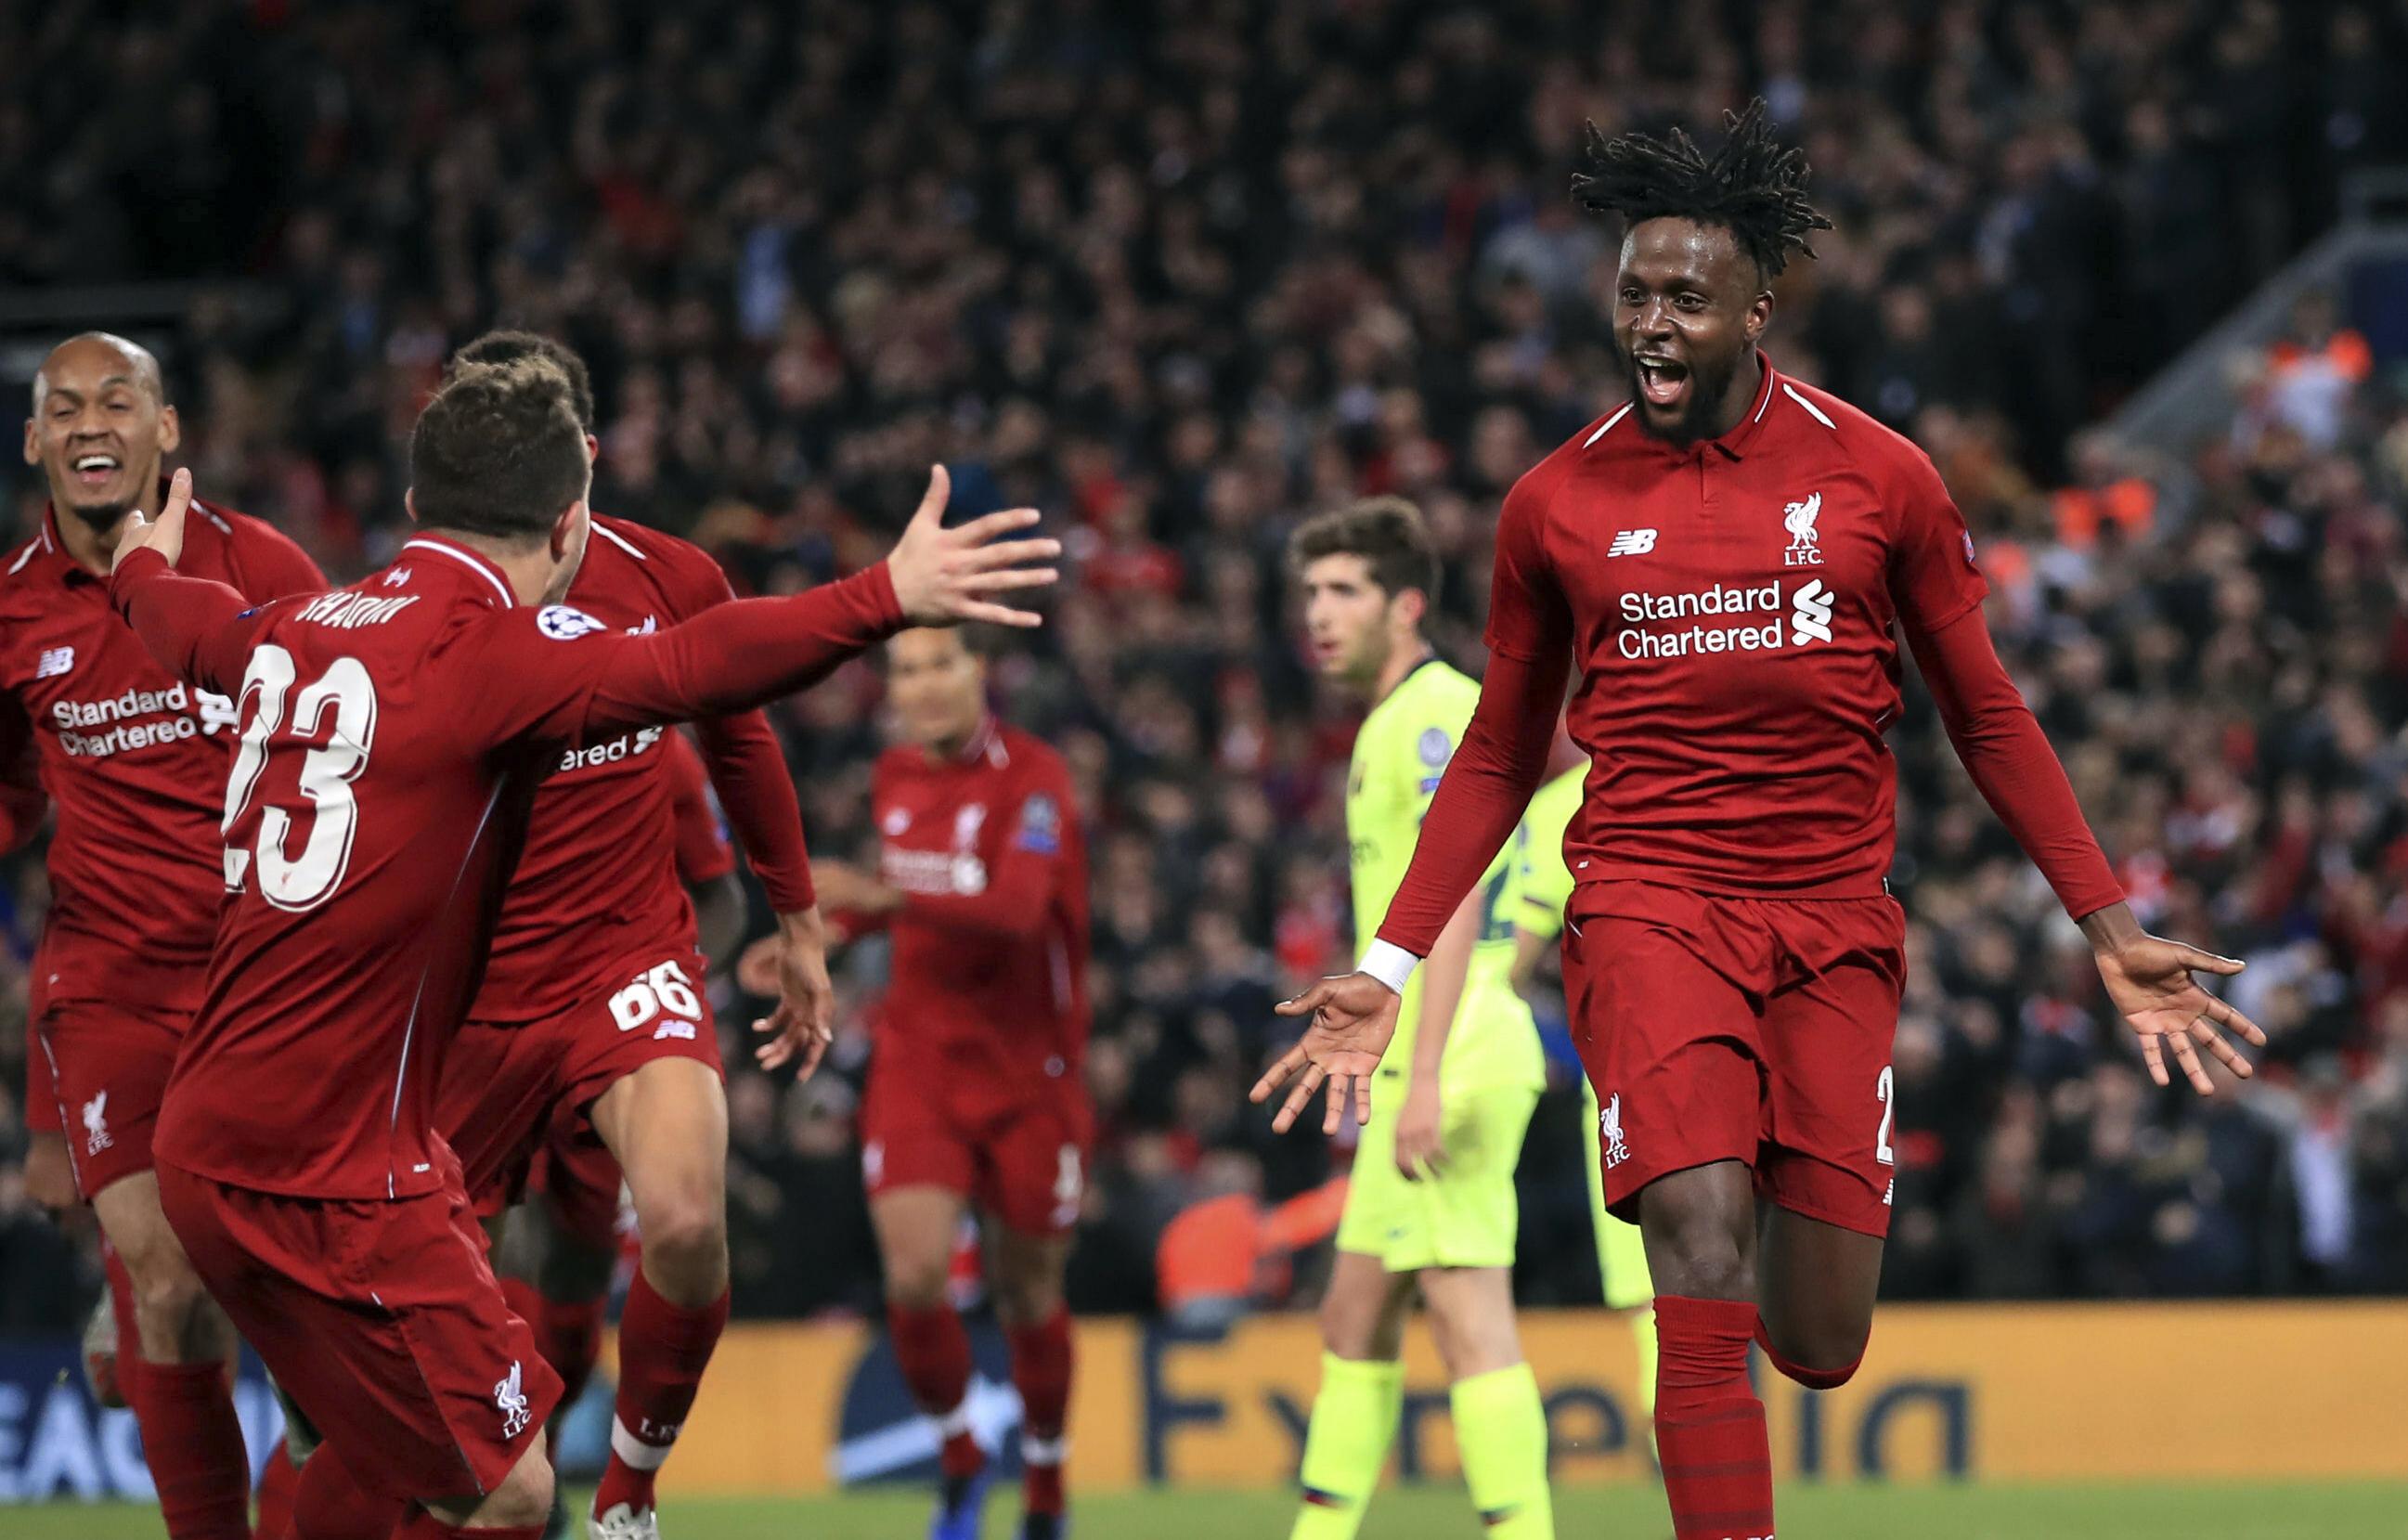 Liverpool ousts Barca in historic UEFA Champions League comeback | The Spokesman-Review2594 x 1659